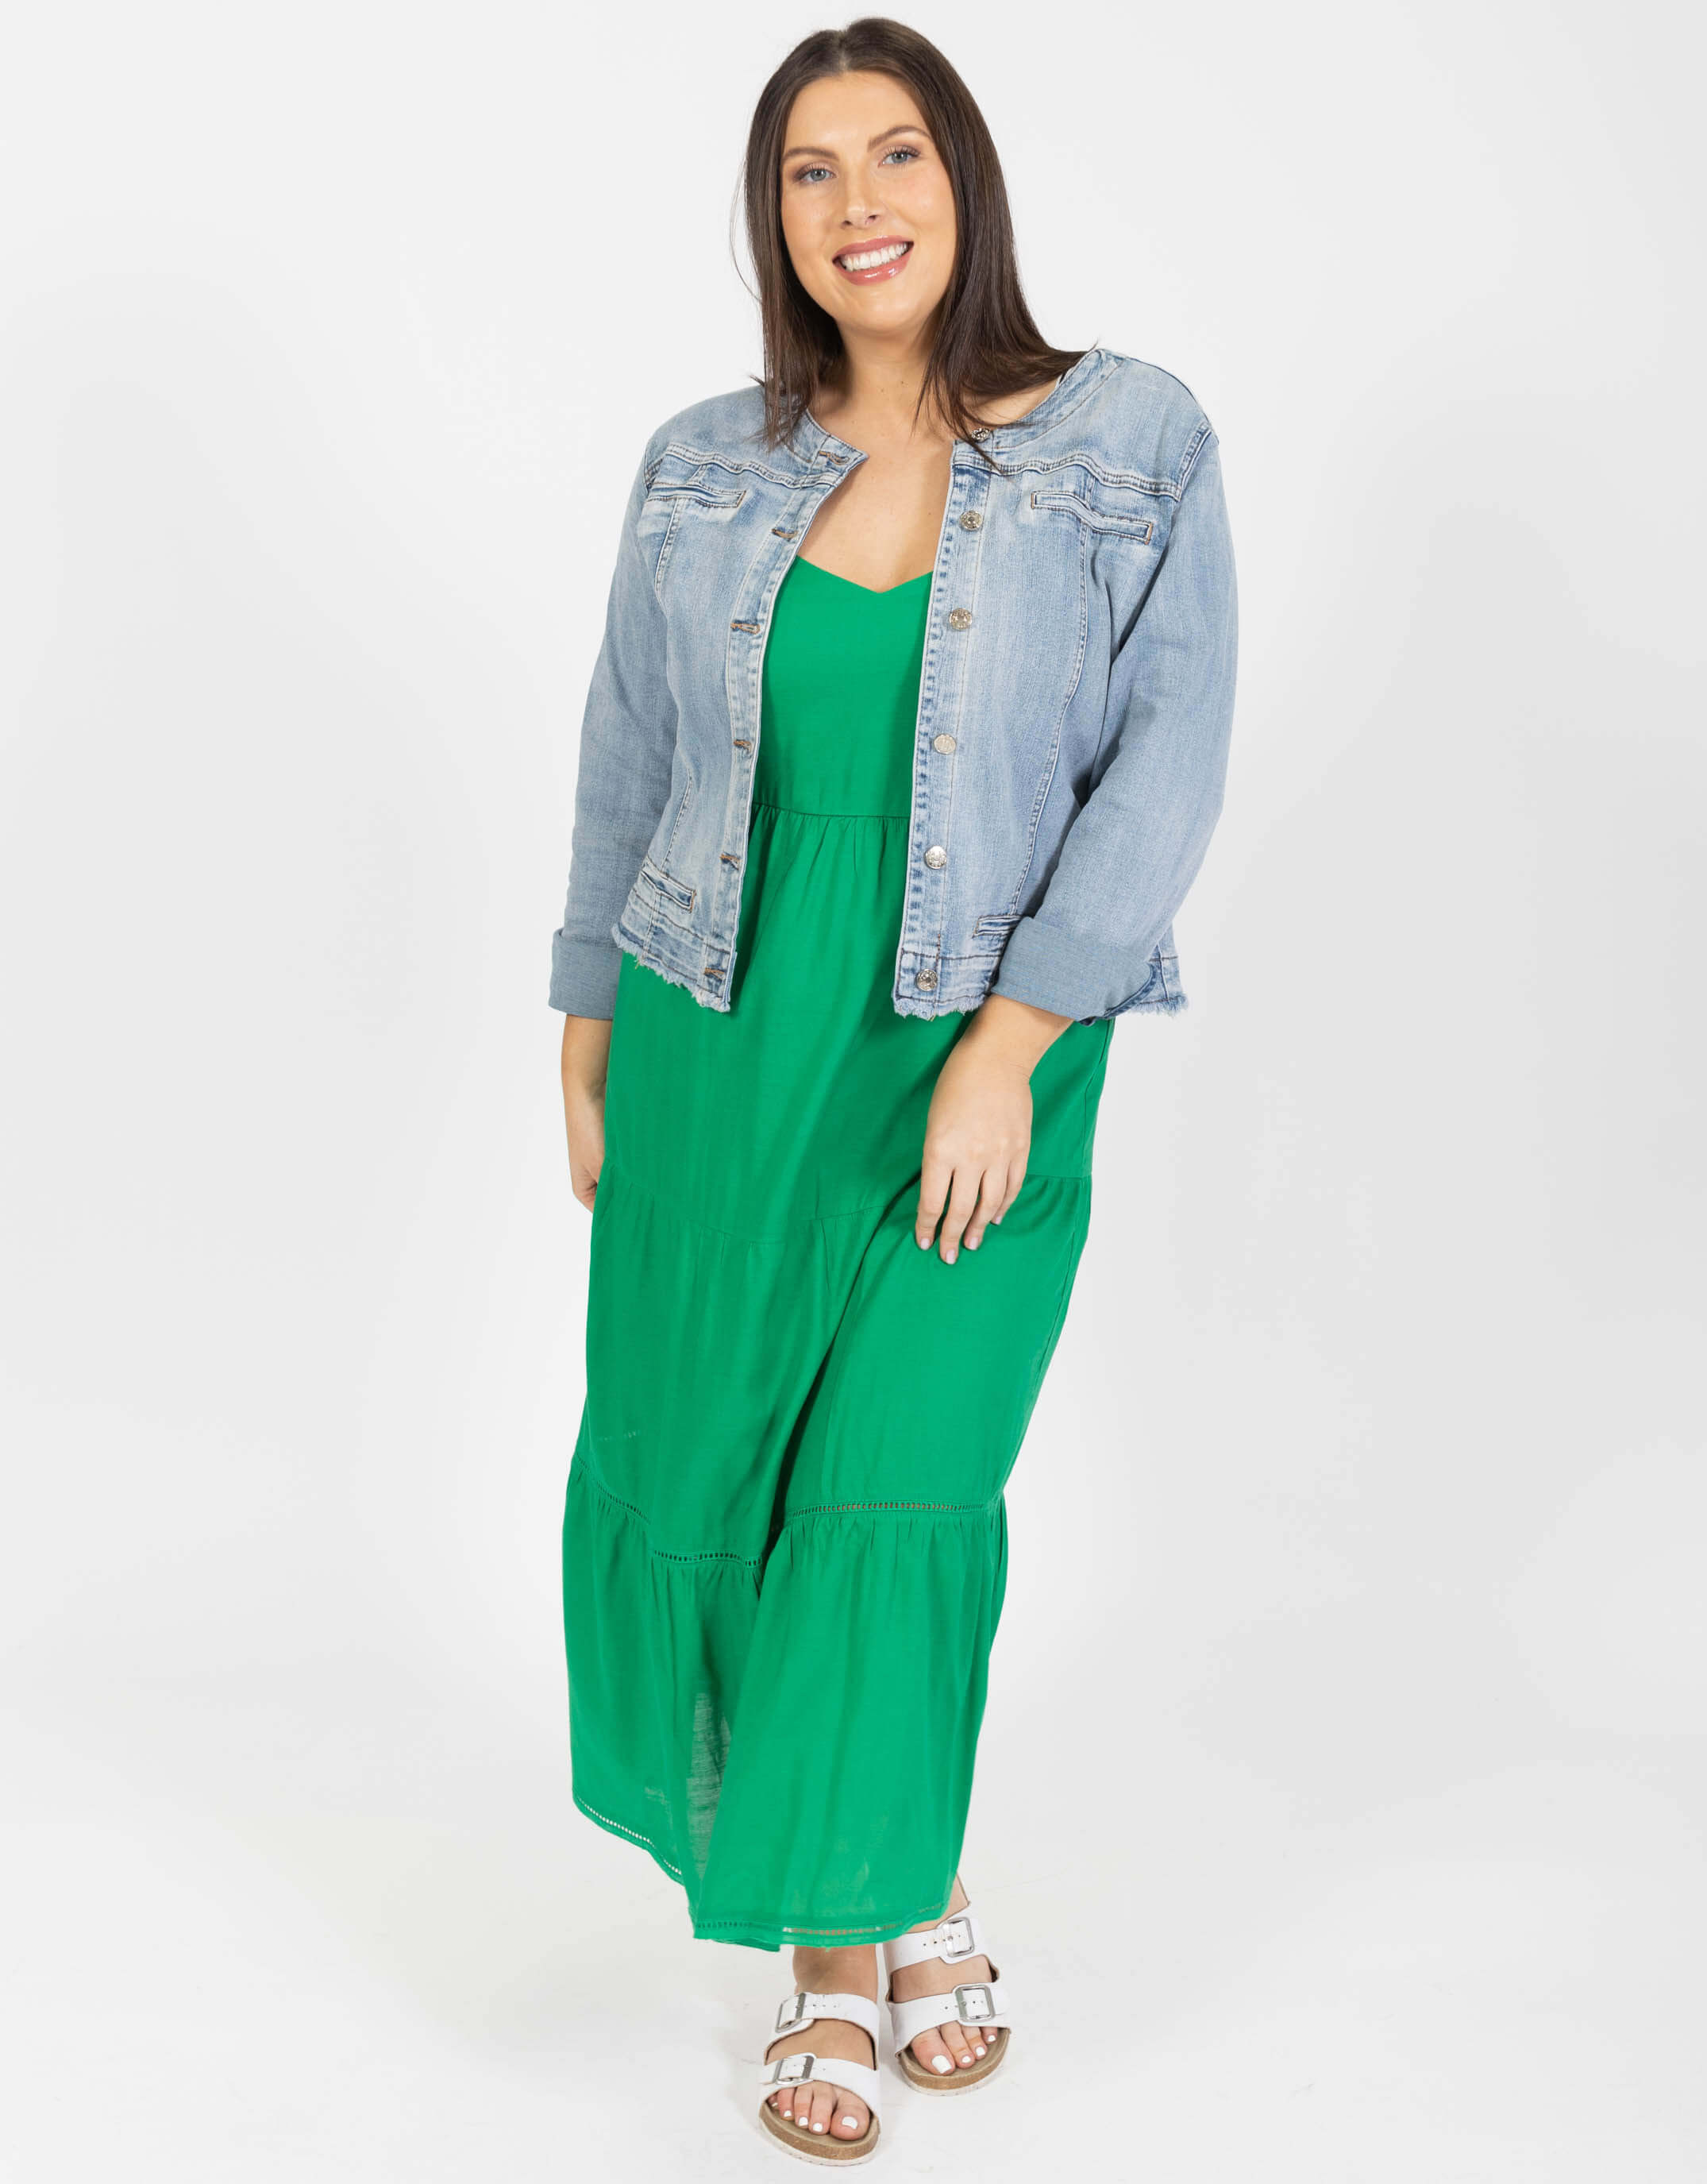 white-and-co-plus-size-oasis-dress-green-womens-plus-size-clothing